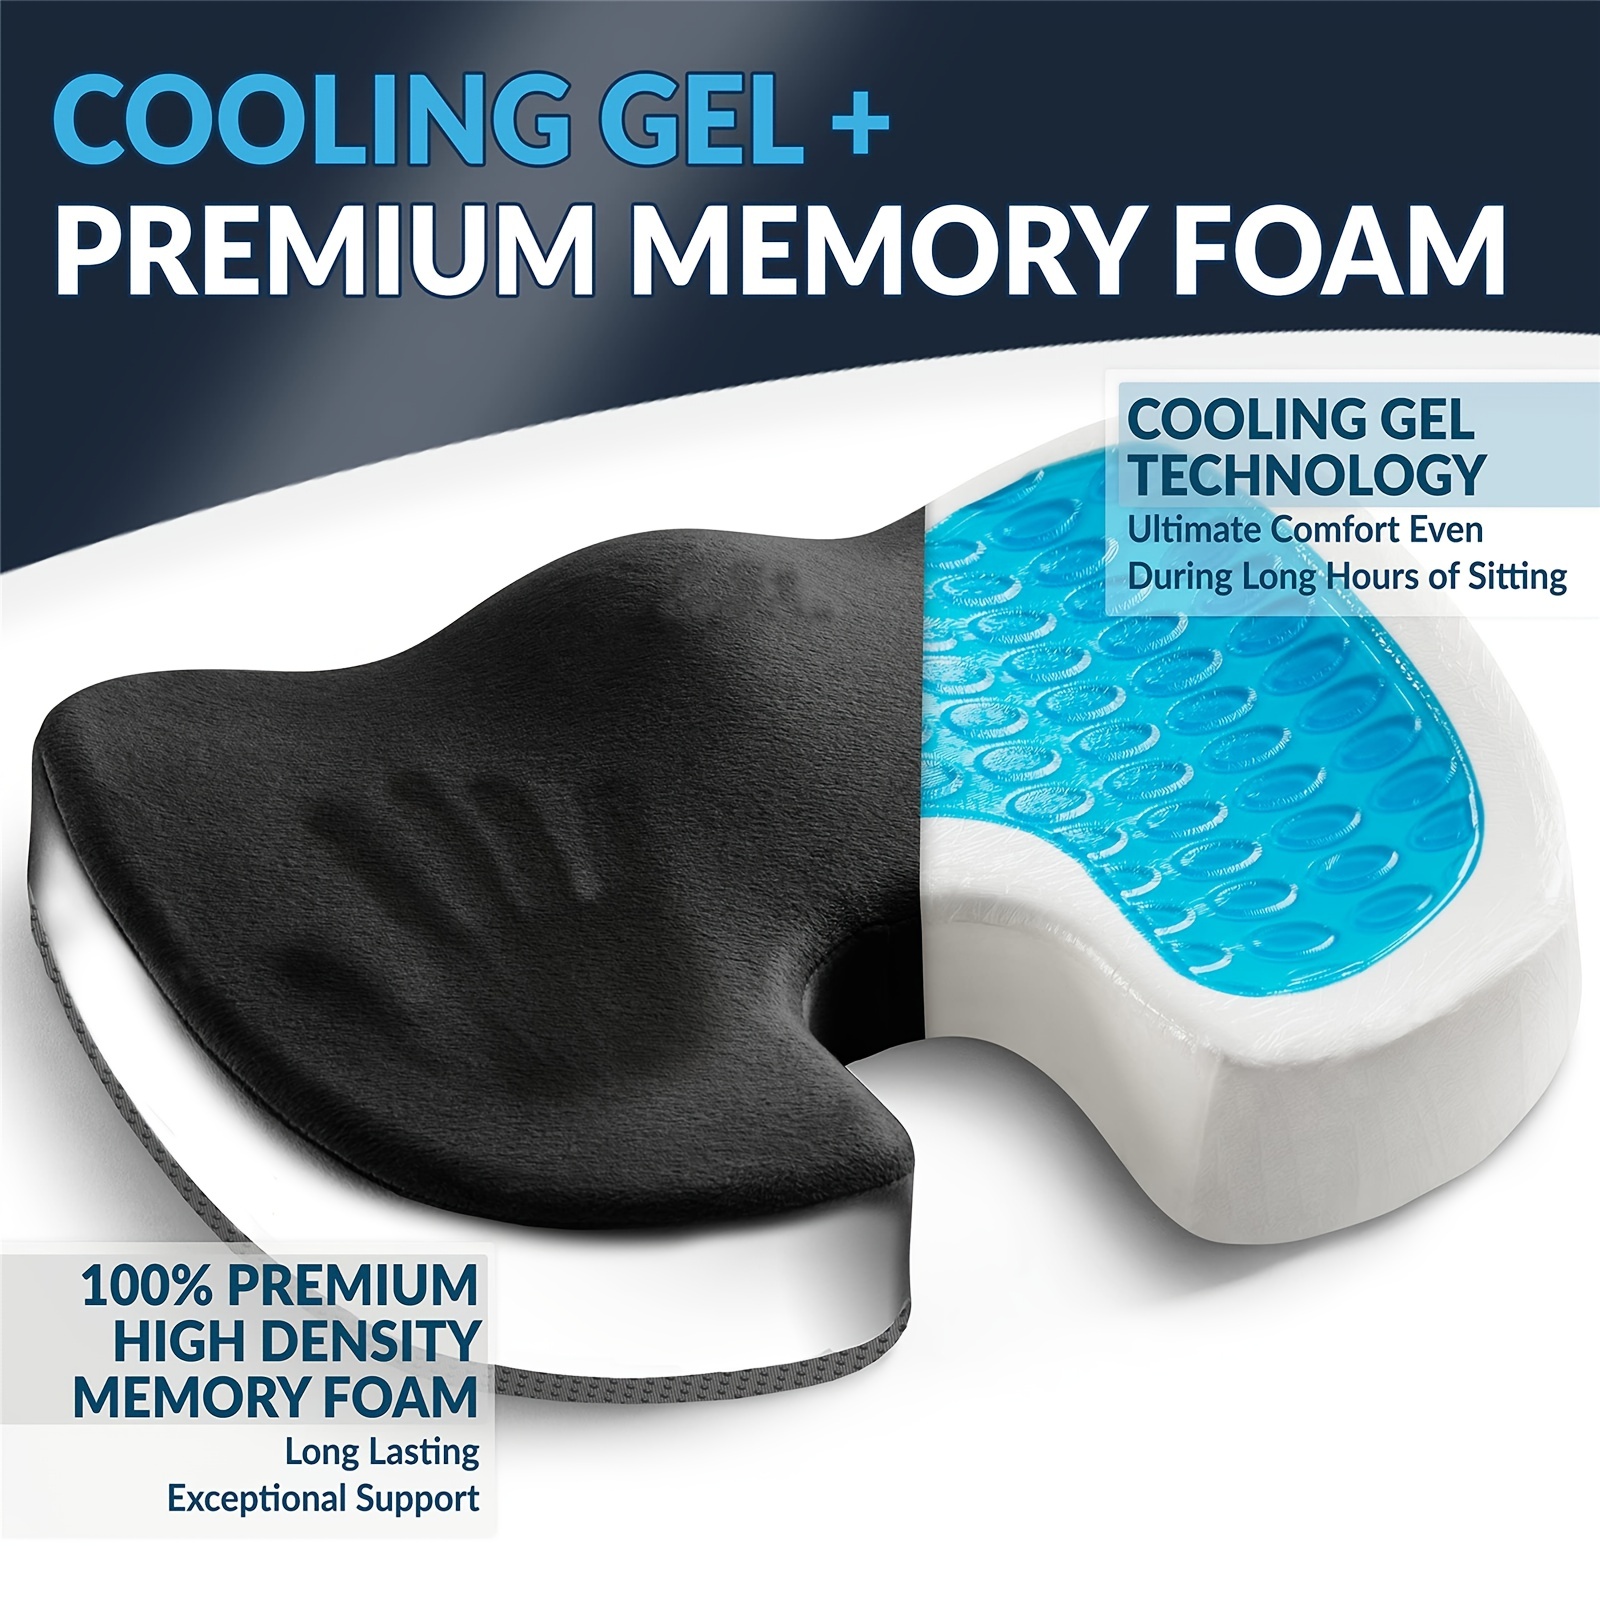 Gel Seat Cushions for Long Sitting, Double Thick Cooling Seat Pads